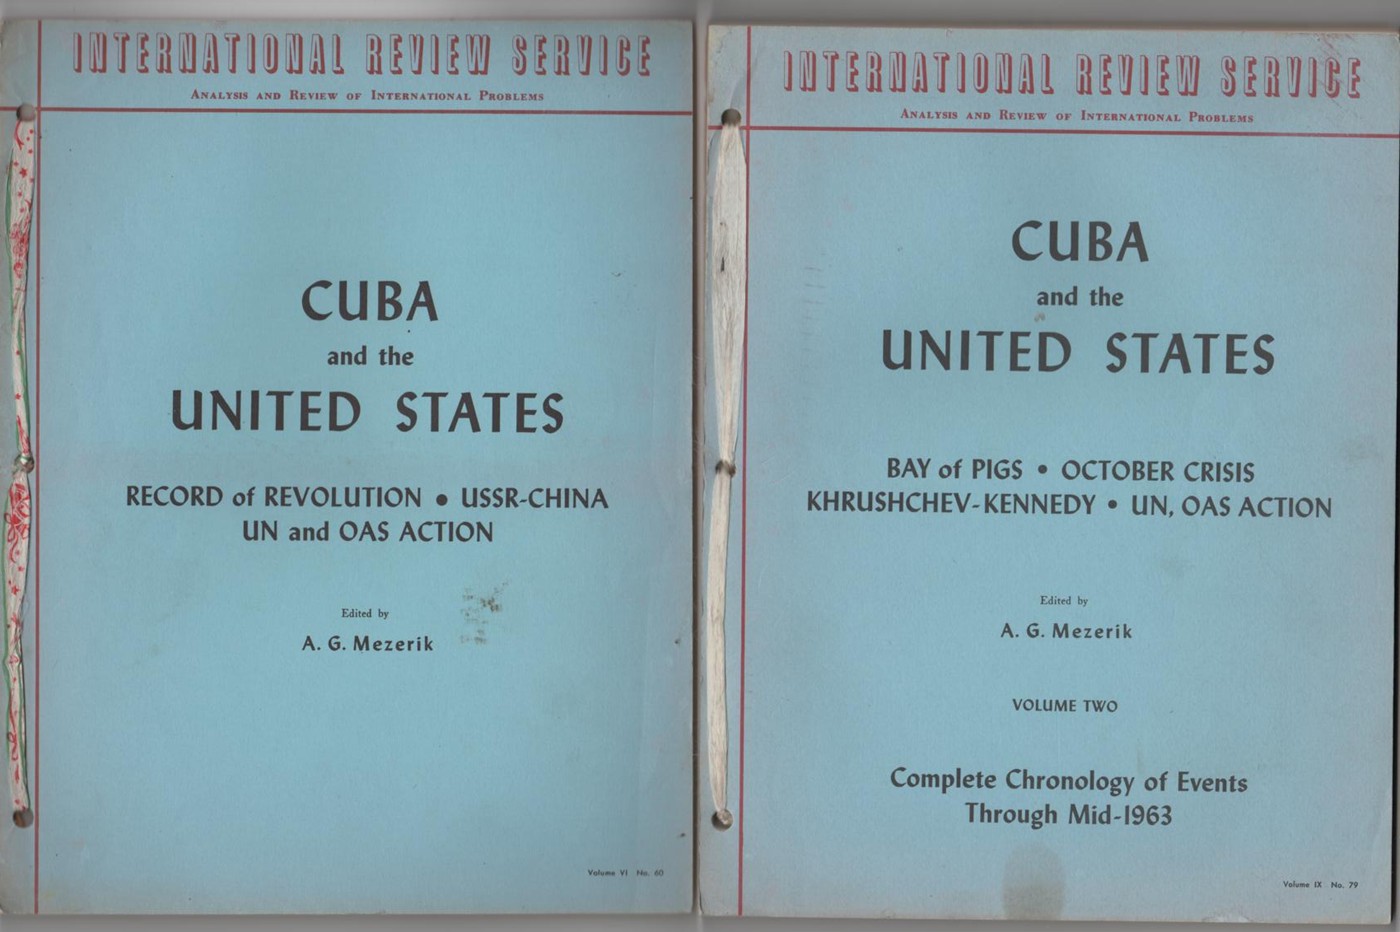 MEZERIK, A. G. (EDITOR) - Cuba and the United States (2 Volumes) Vol 1. Record of Revolution, Ussr-China, Un and Oas Action; Vol 2. Bay of Pigs, October Crisis, Kruschev